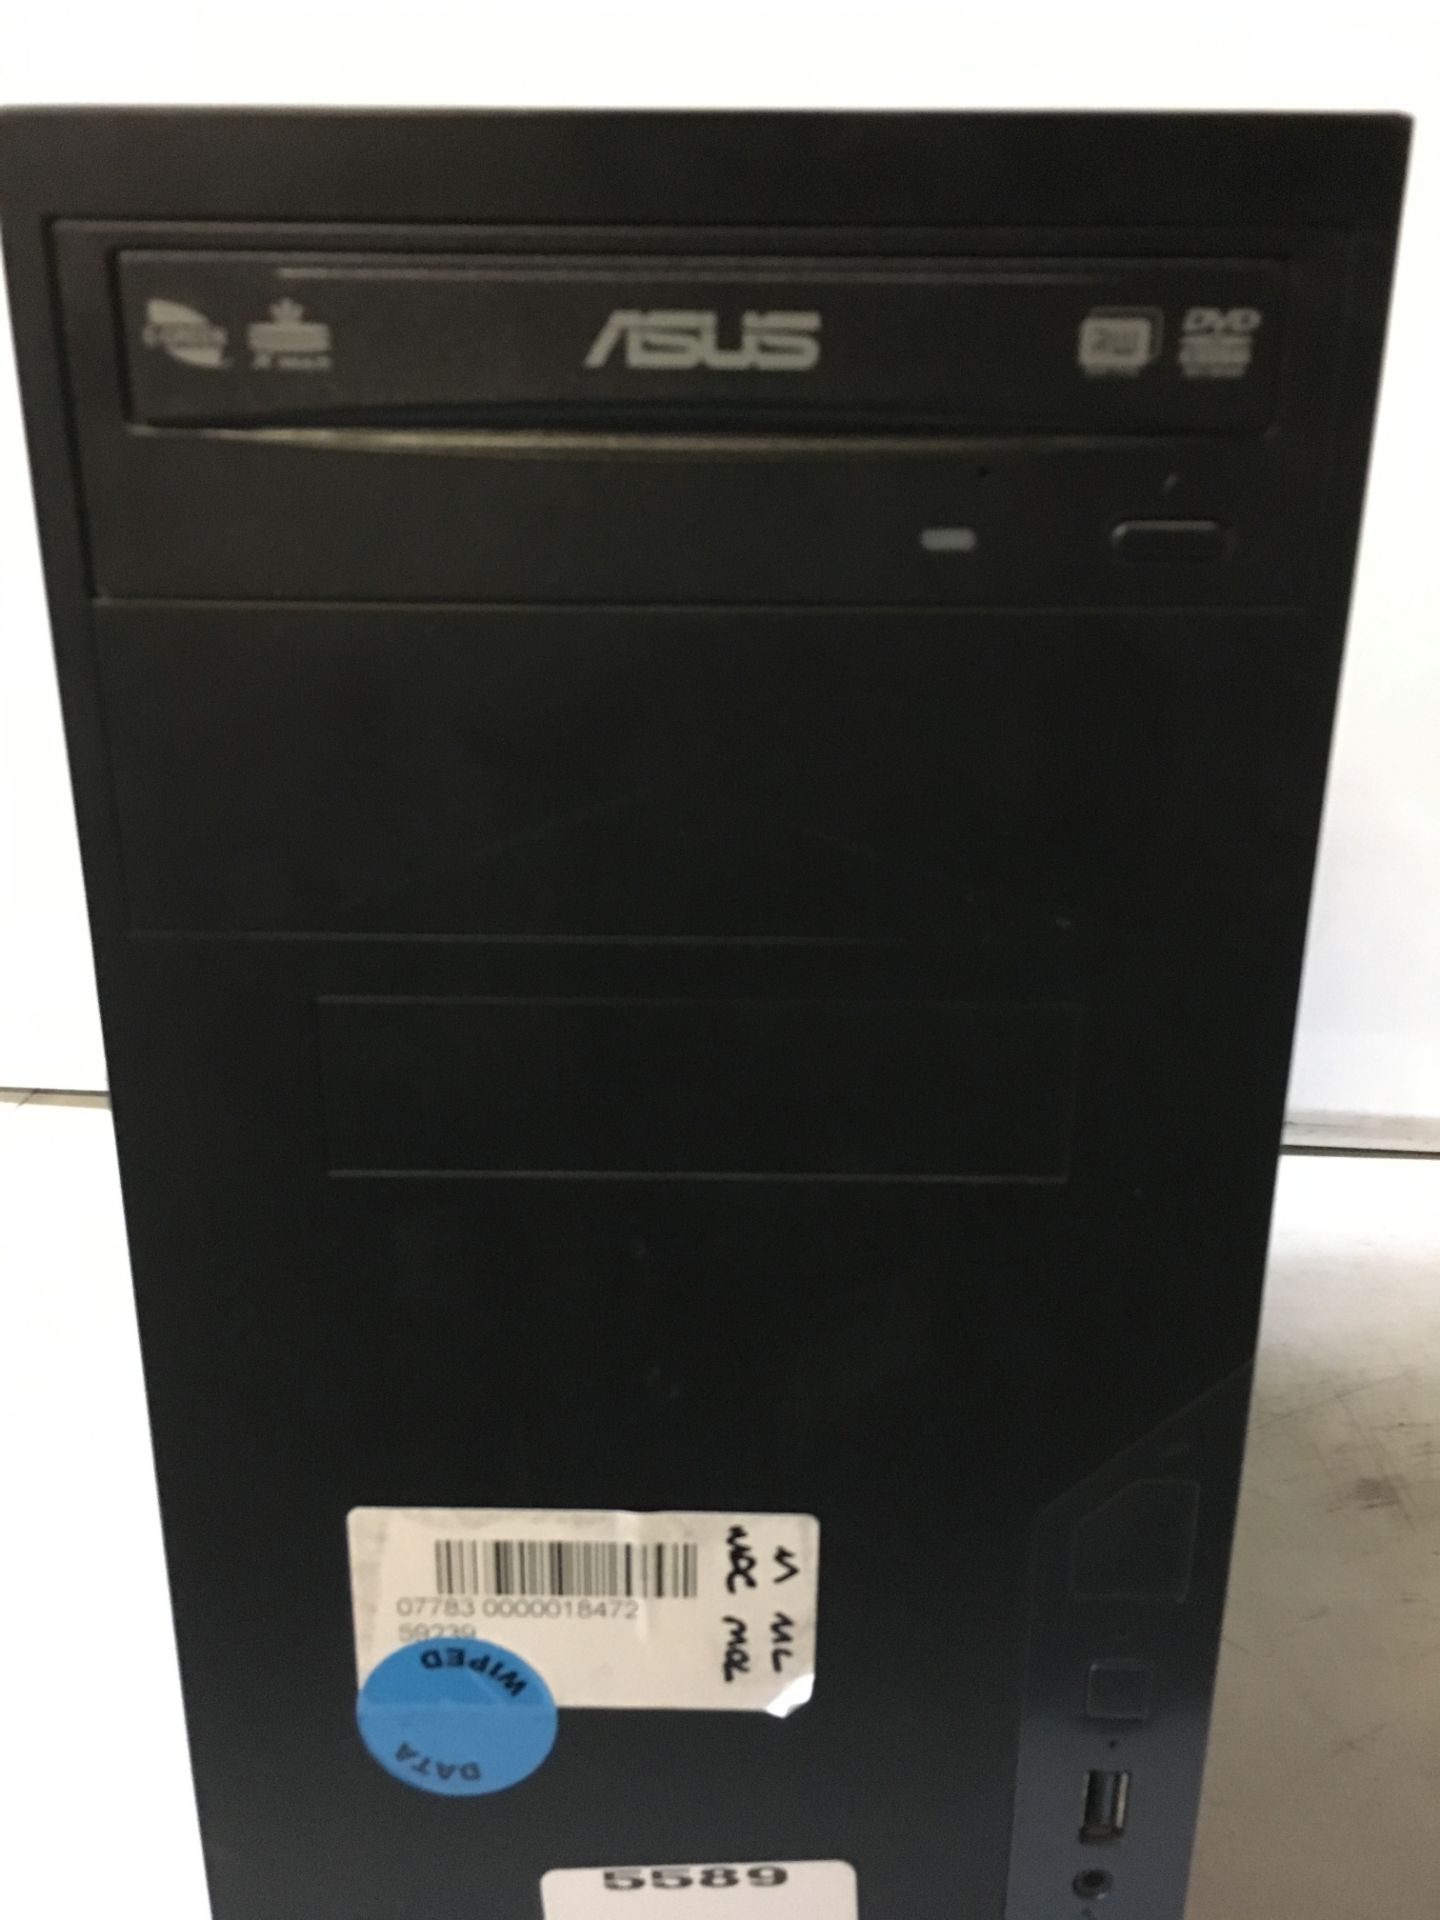 Asus Computer - Image 3 of 3